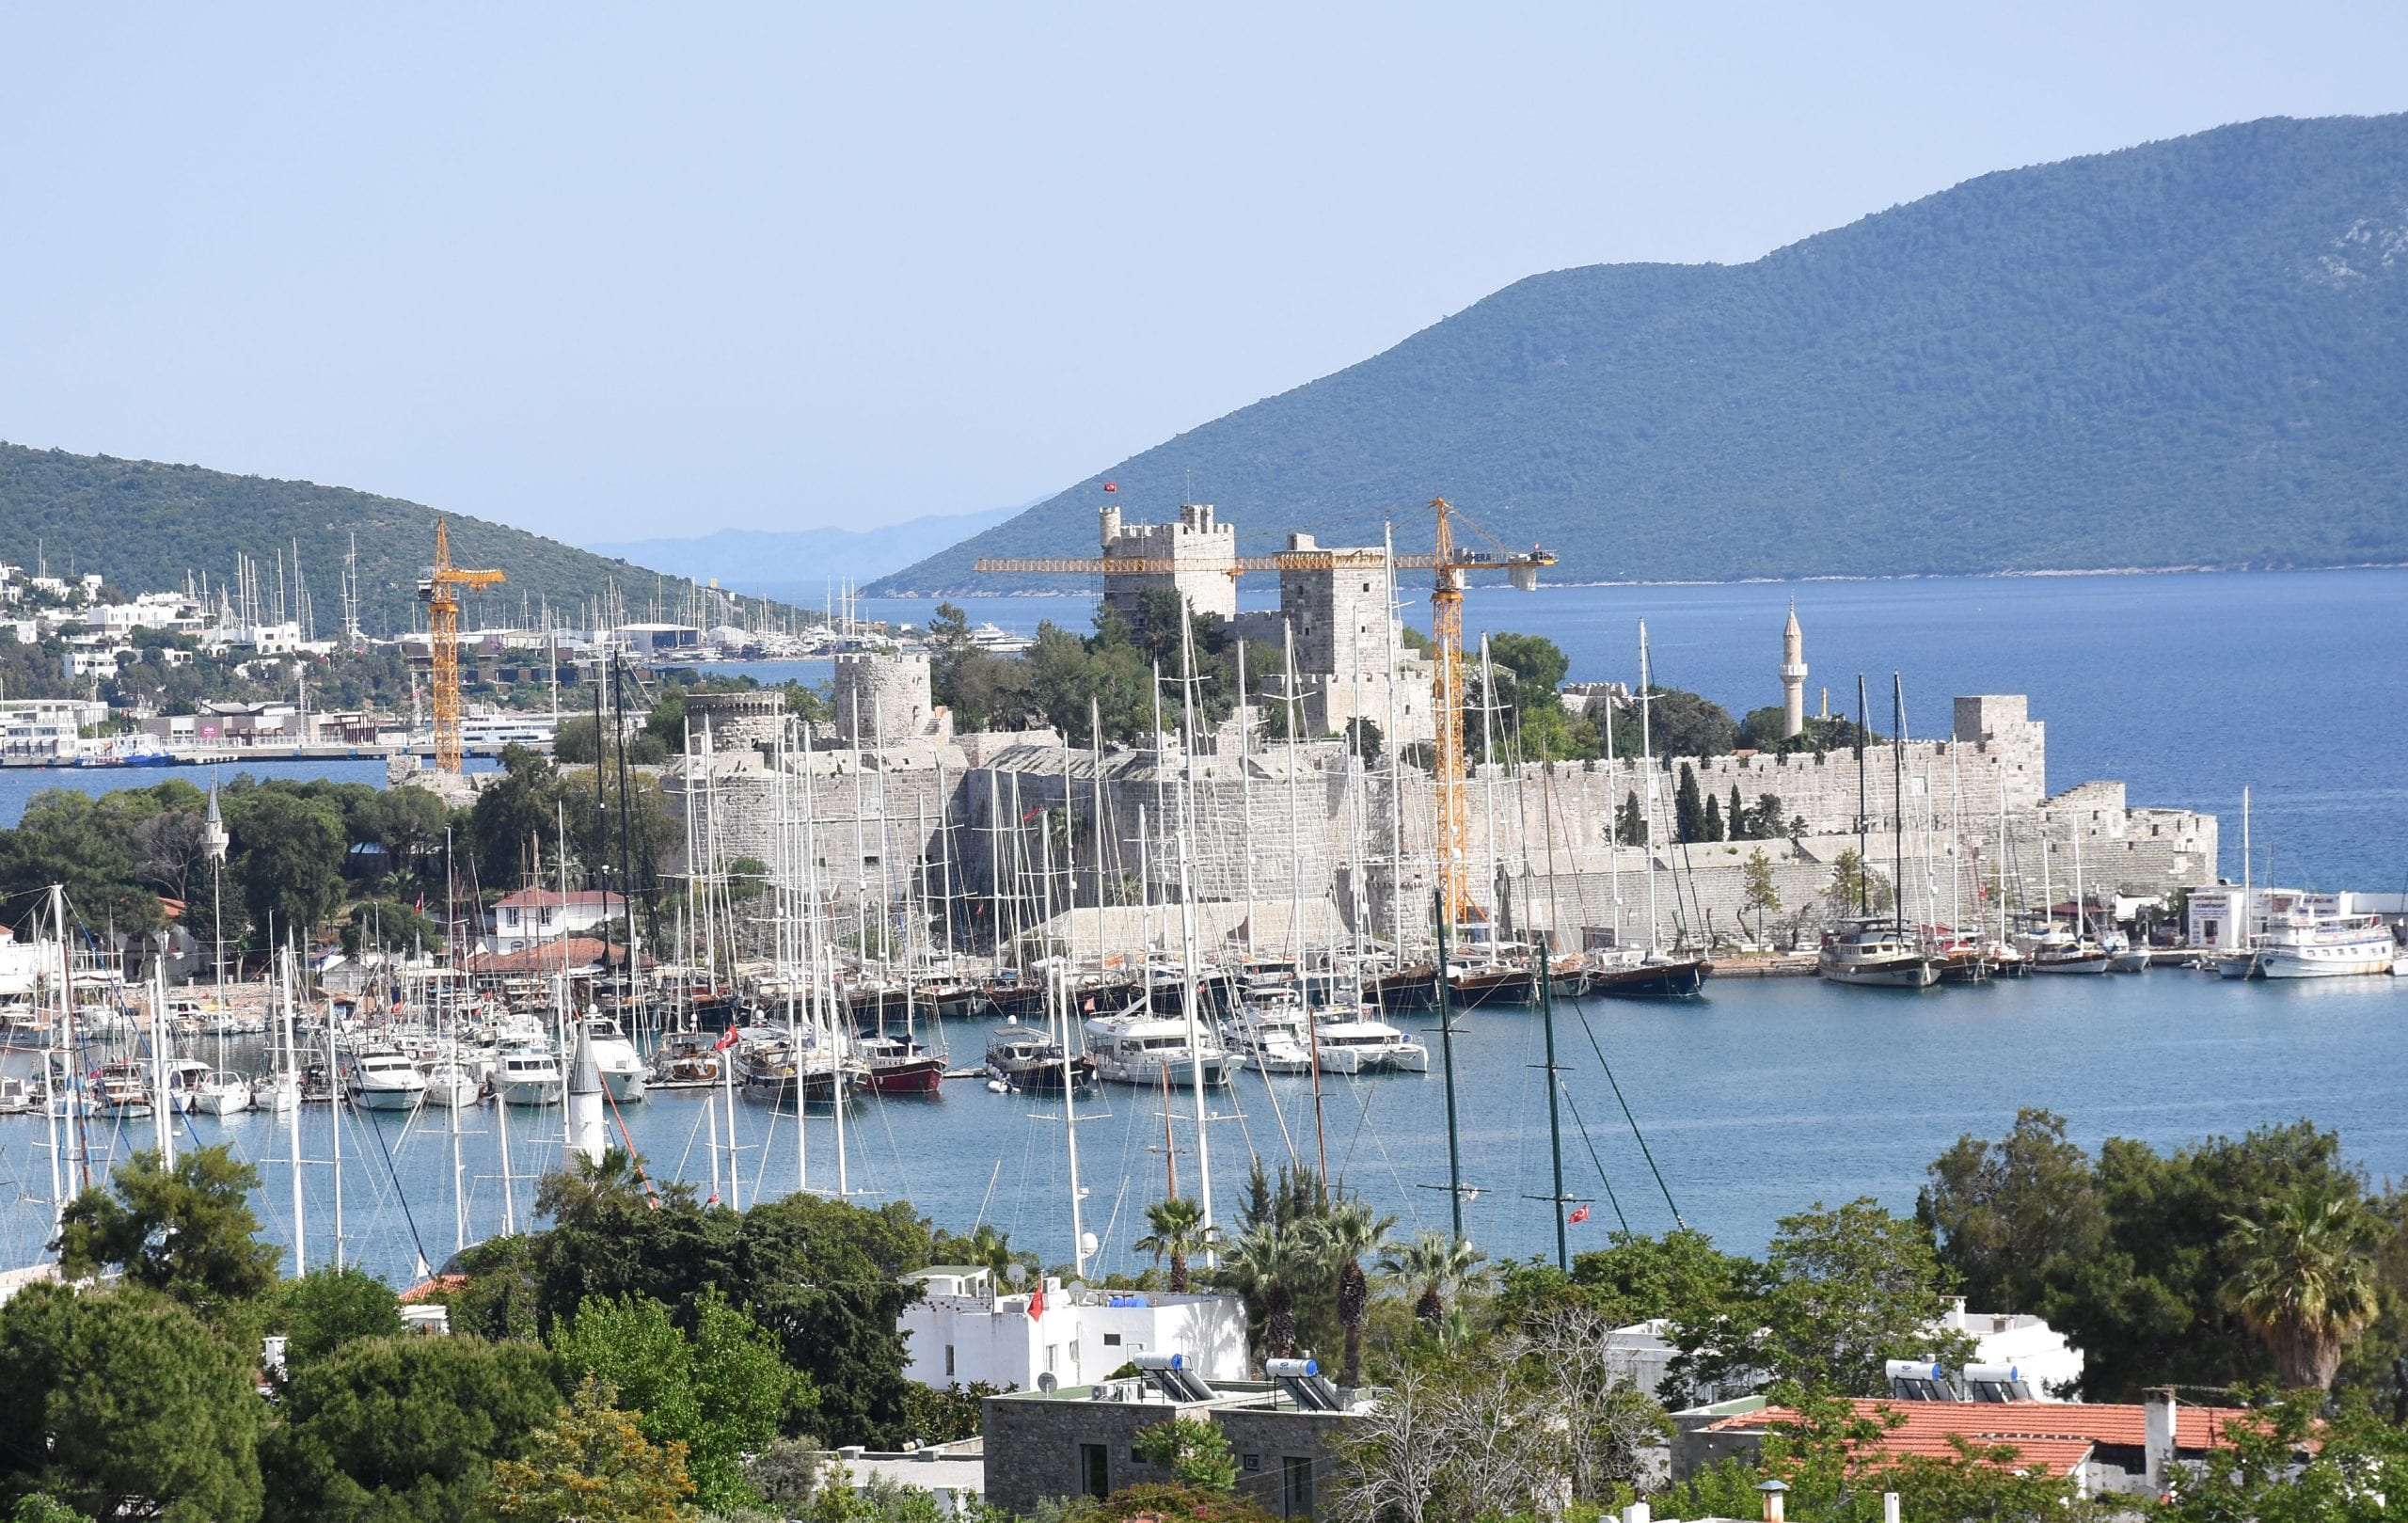 Hotels in Turkey’s Bodrum prepare for the upcoming summer season